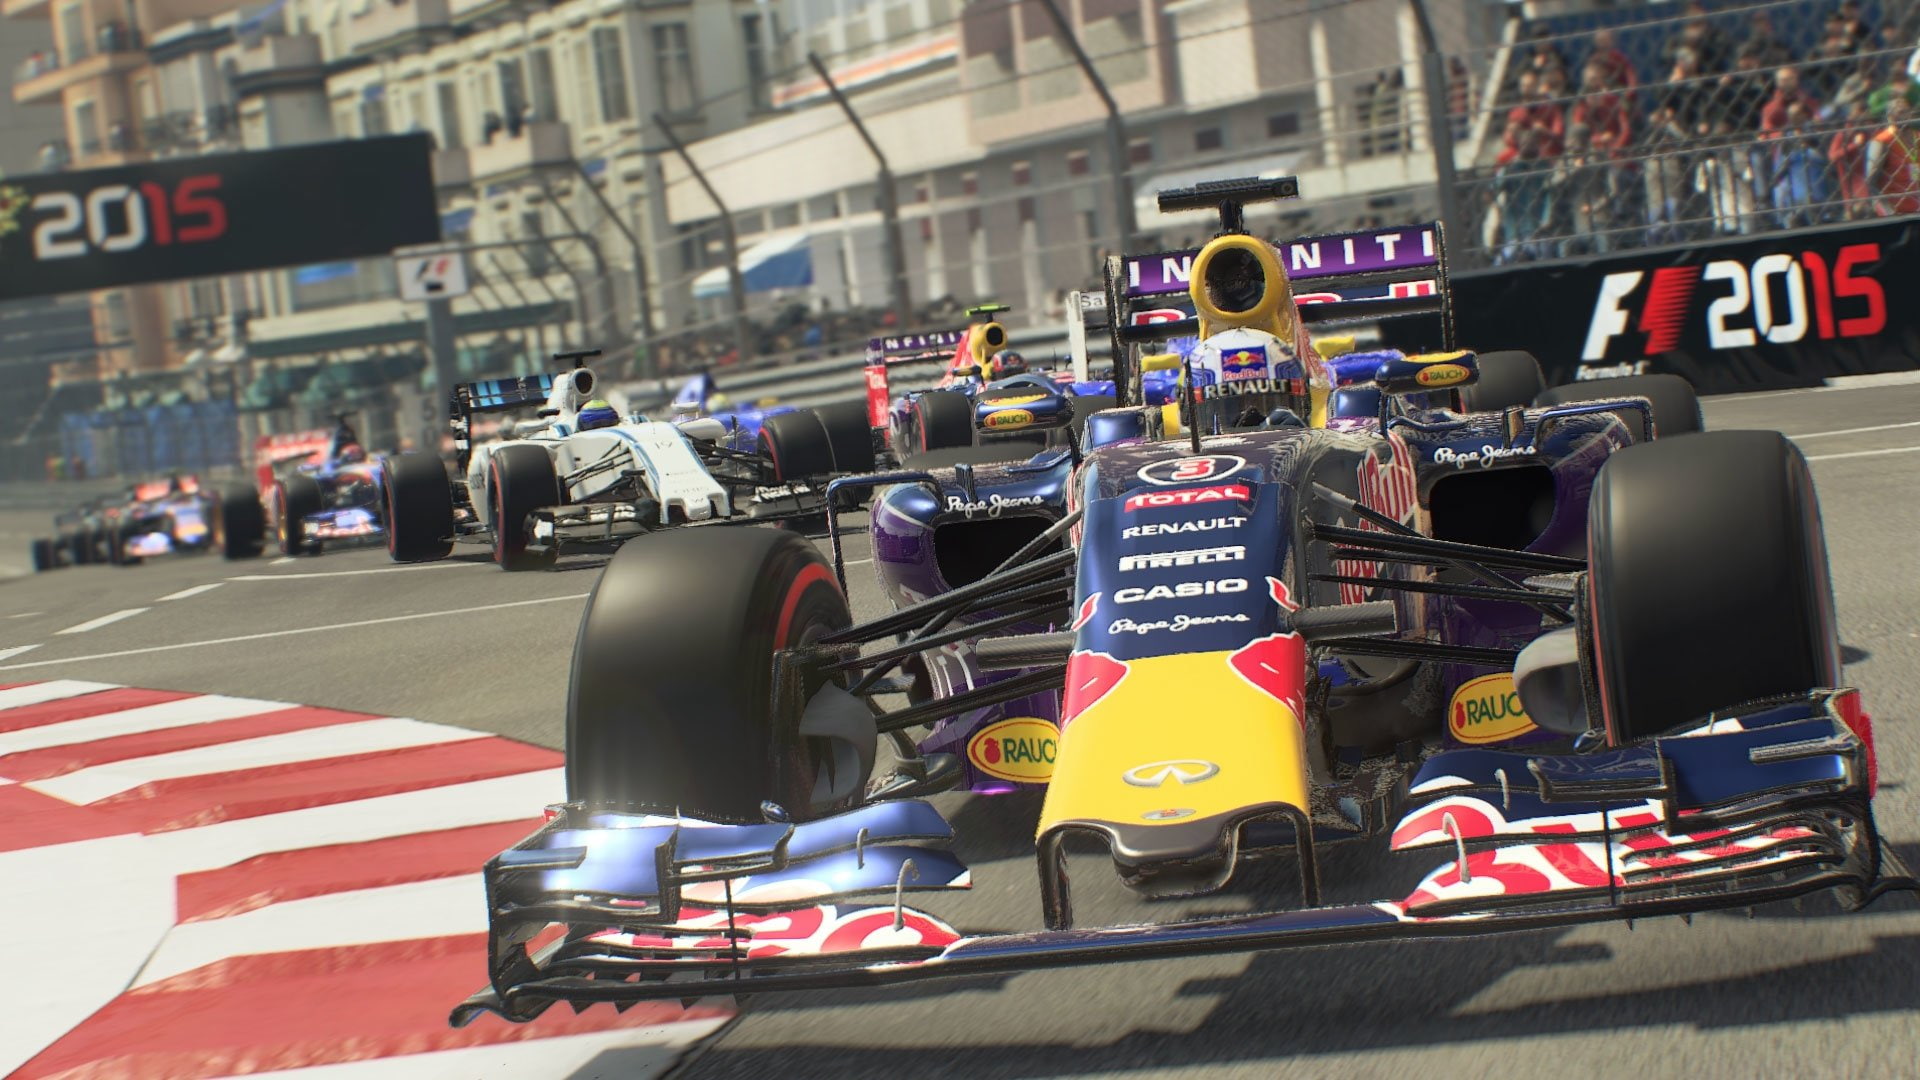 Video Game, F1 2015